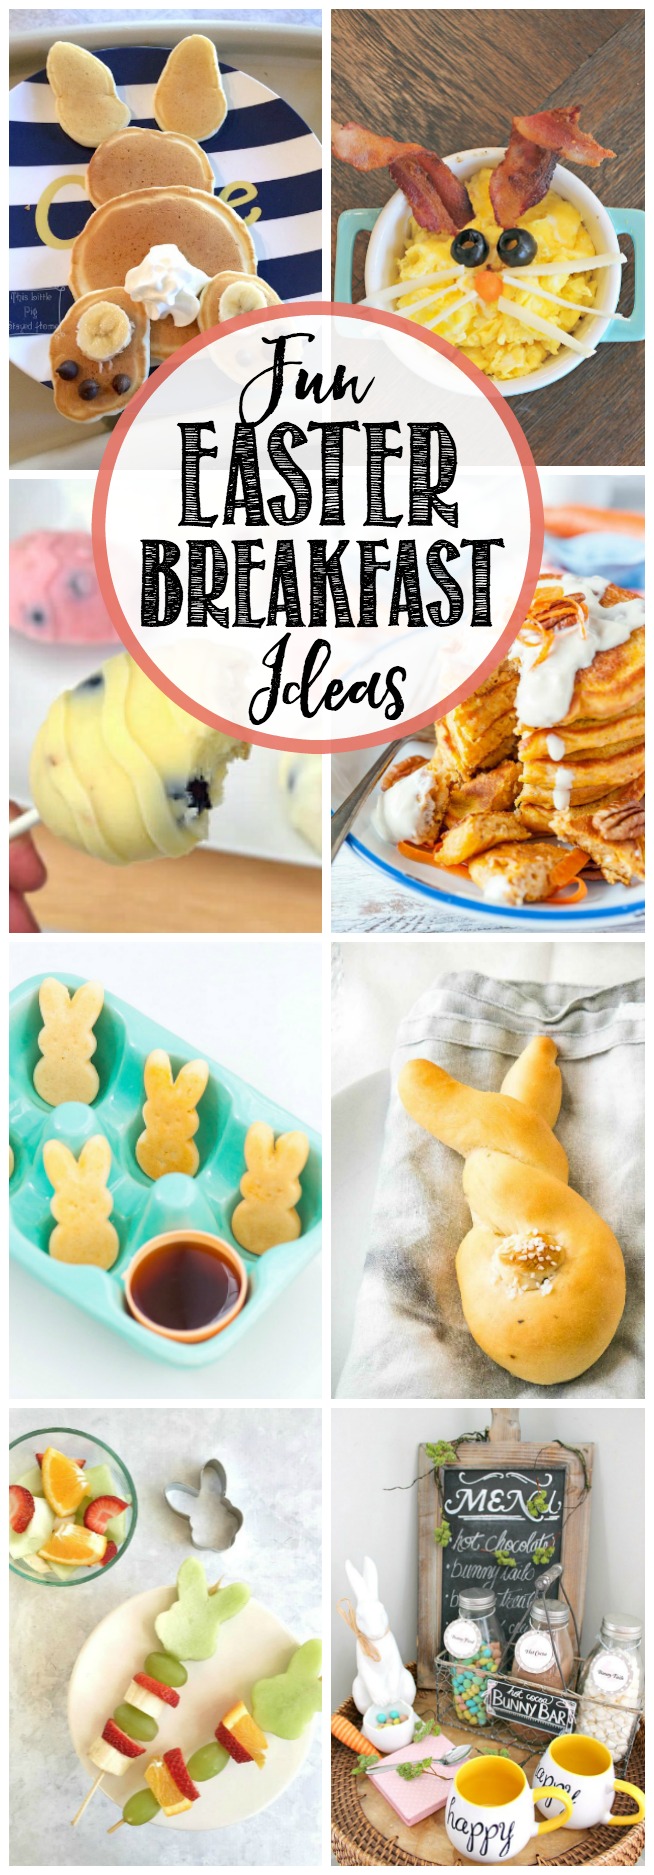 Awesome collection of fun and easy Easter breakfast recipes and ideas. Such a wonderful family tradition to start!